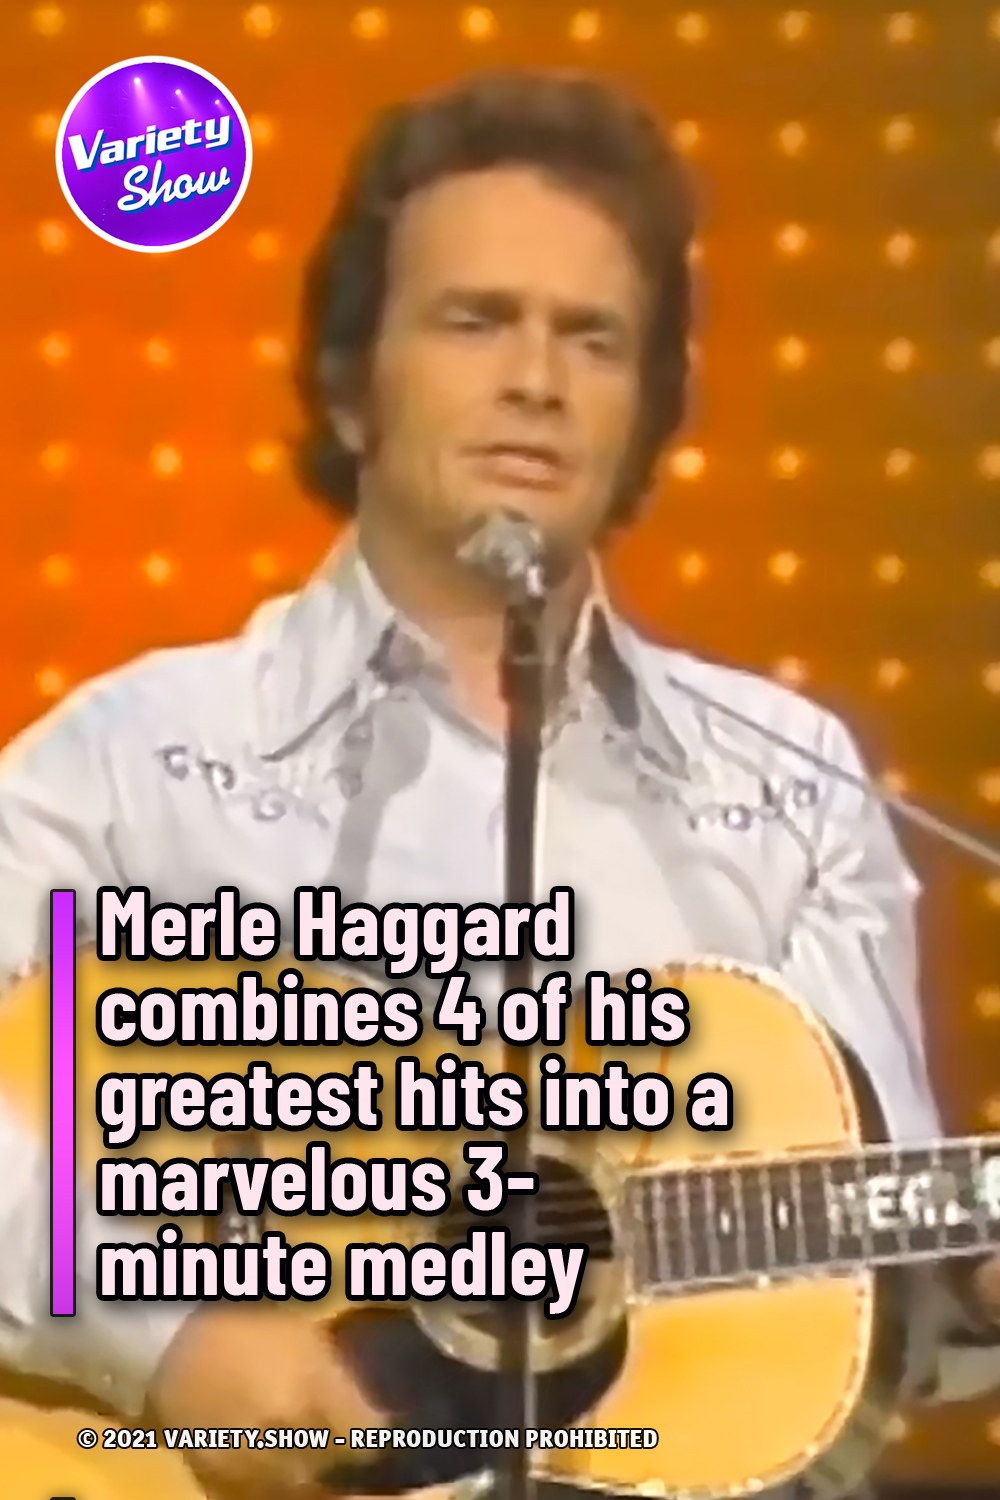 Merle Haggard combines 4 of his greatest hits into a marvelous 3-minute medley